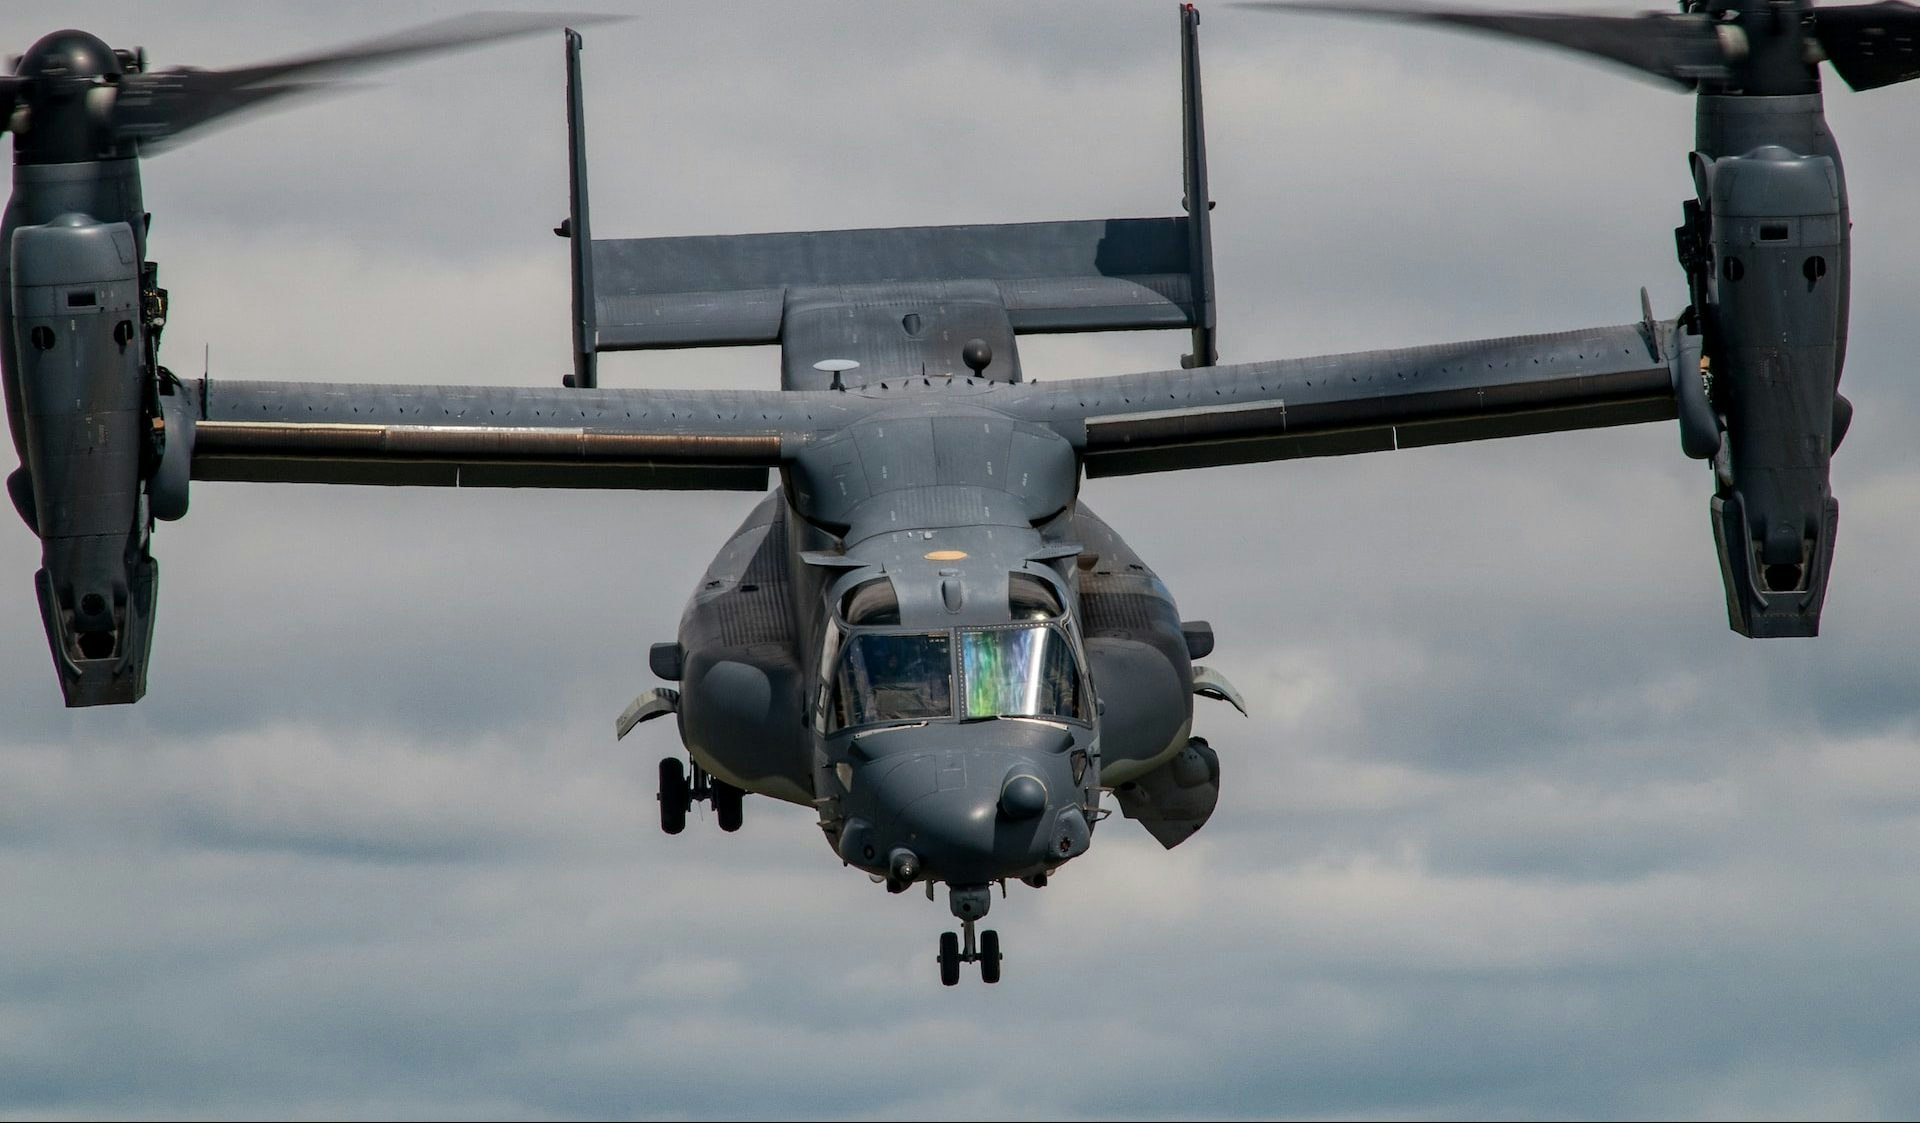 An image of a military helicopter